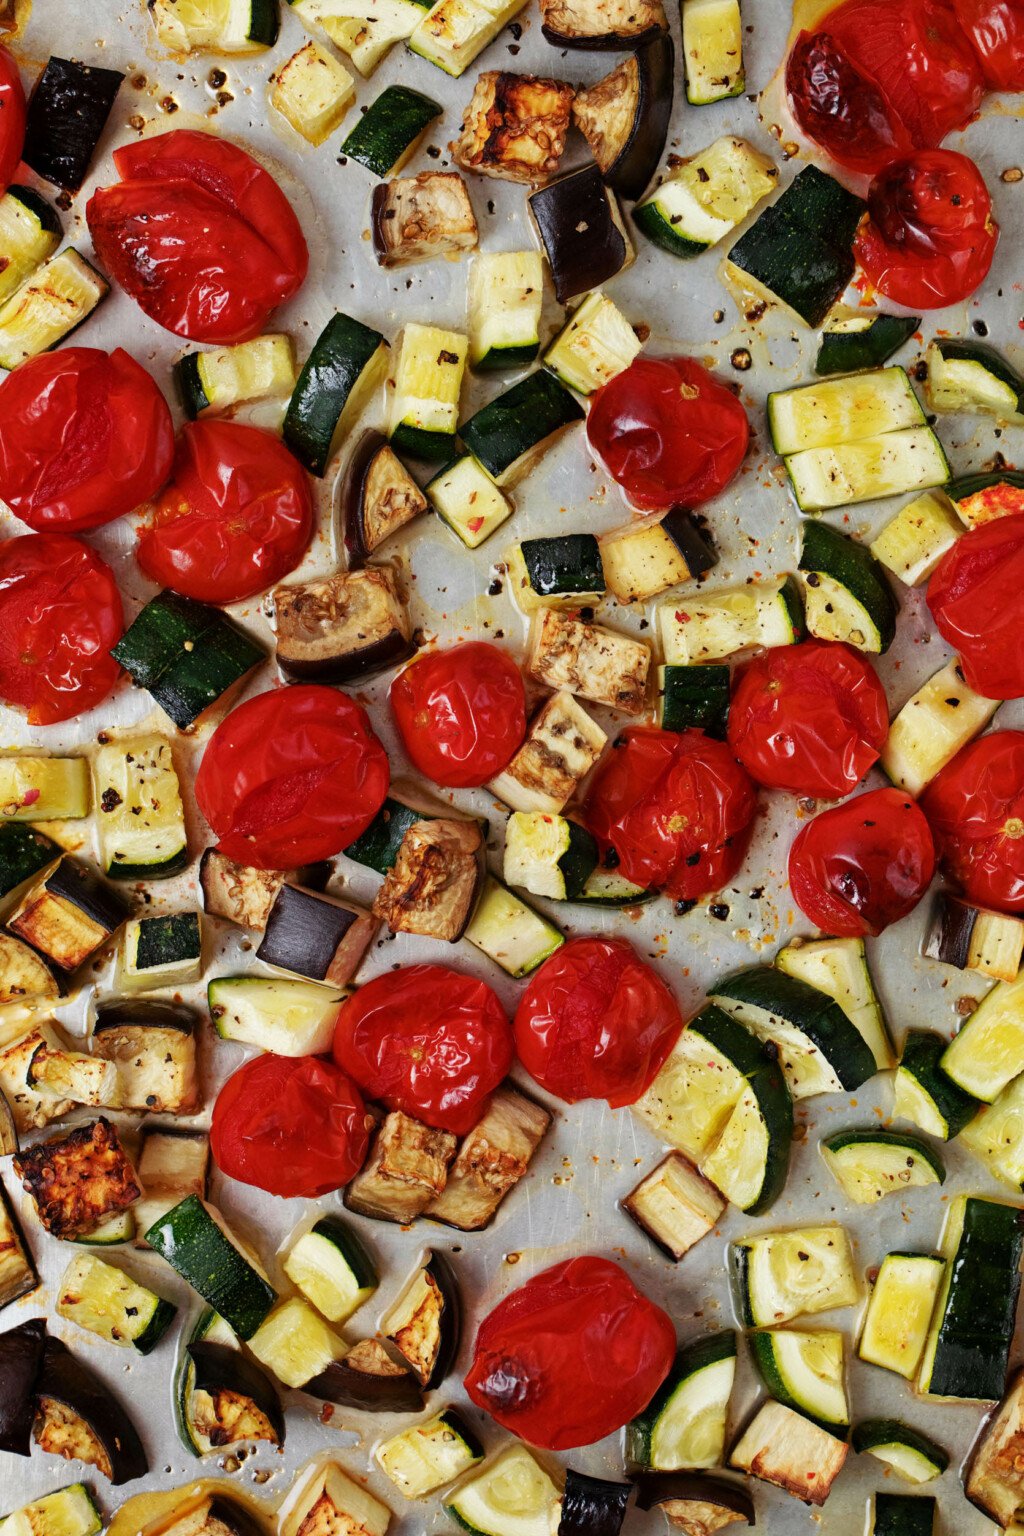 A close up image of roasted grape tomatoes, zucchini and eggplant on a baking tray.